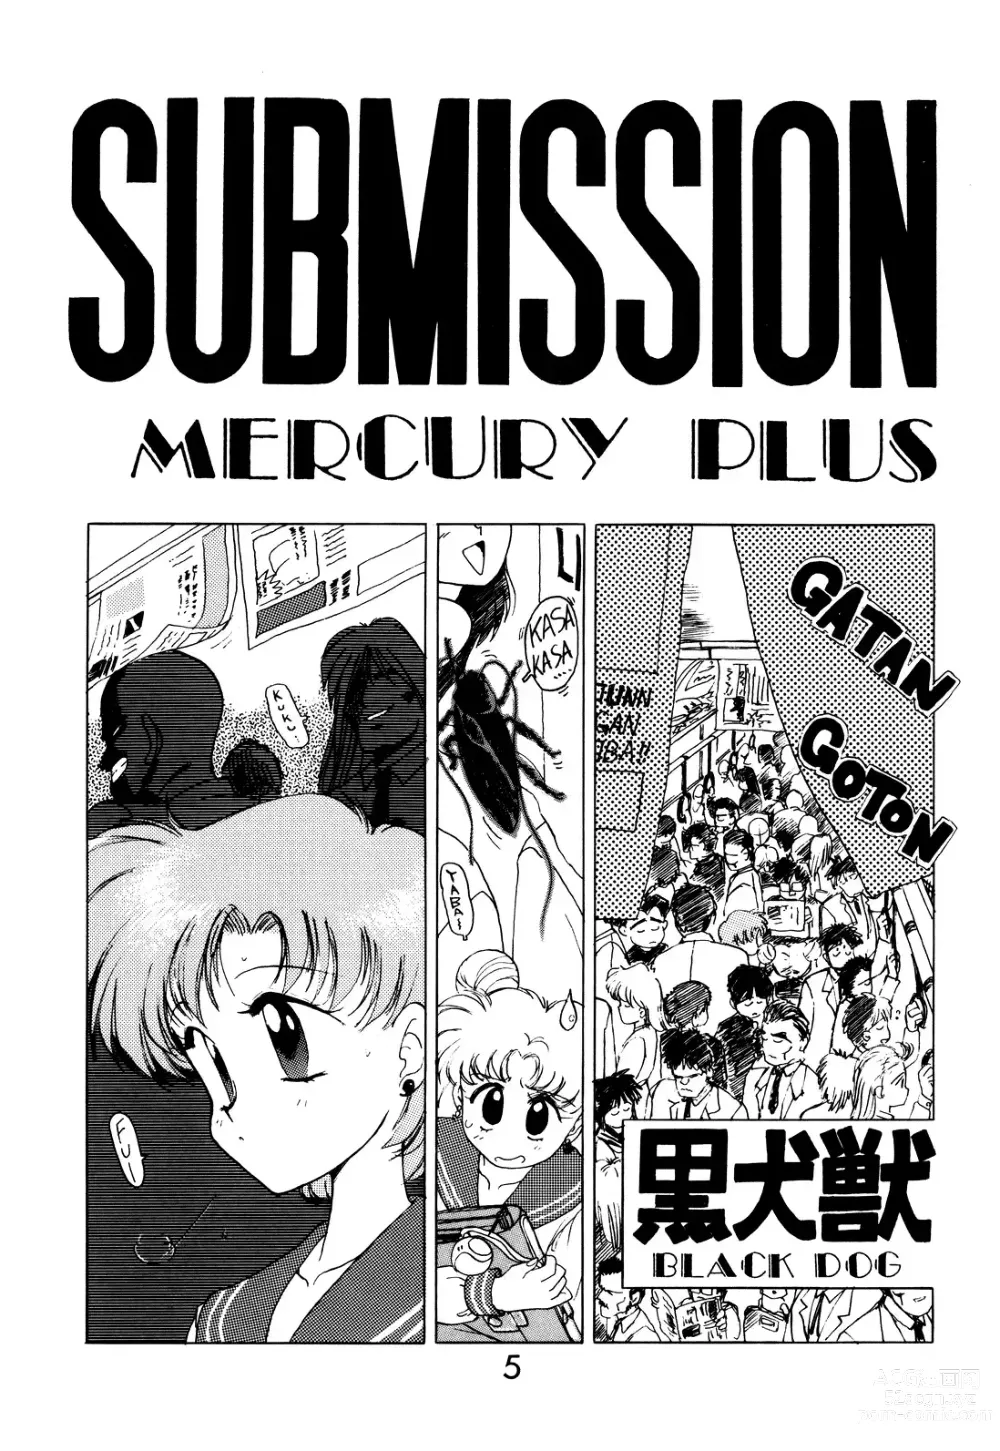 Page 4 of doujinshi Submission Mercury Plus